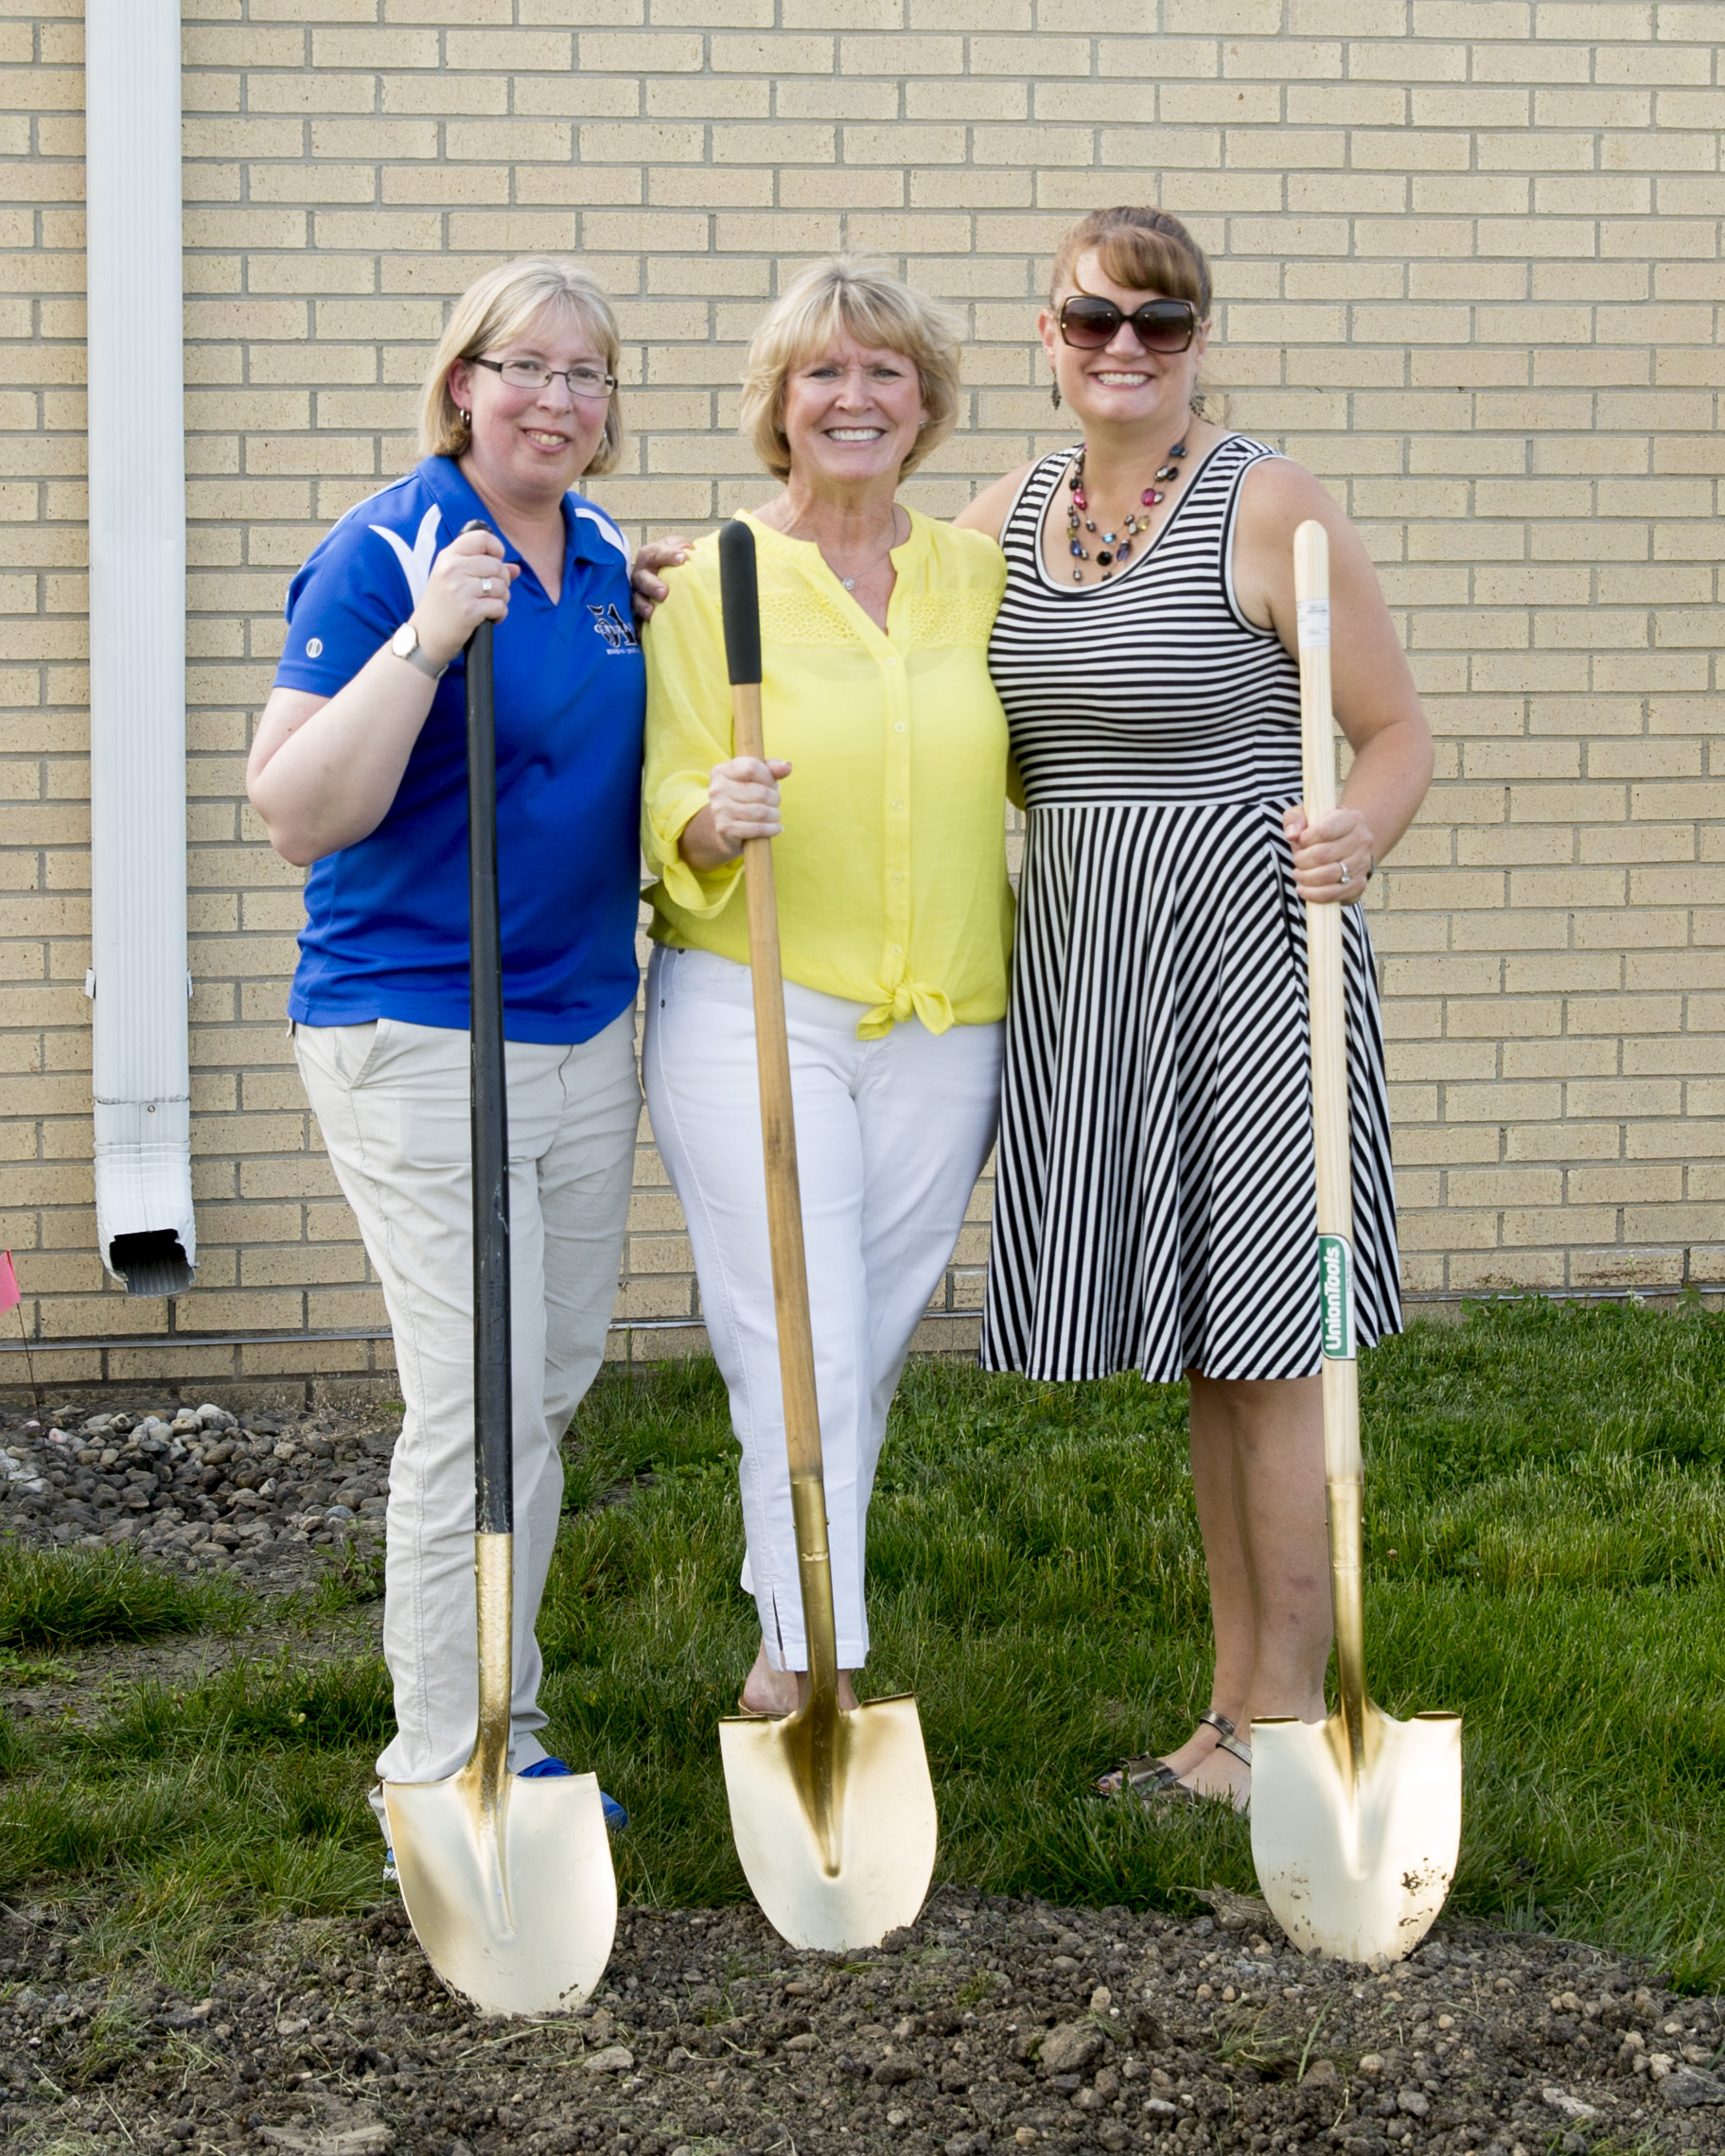 Members of the Board of Education posing the same as the teachers and with their own shovels.